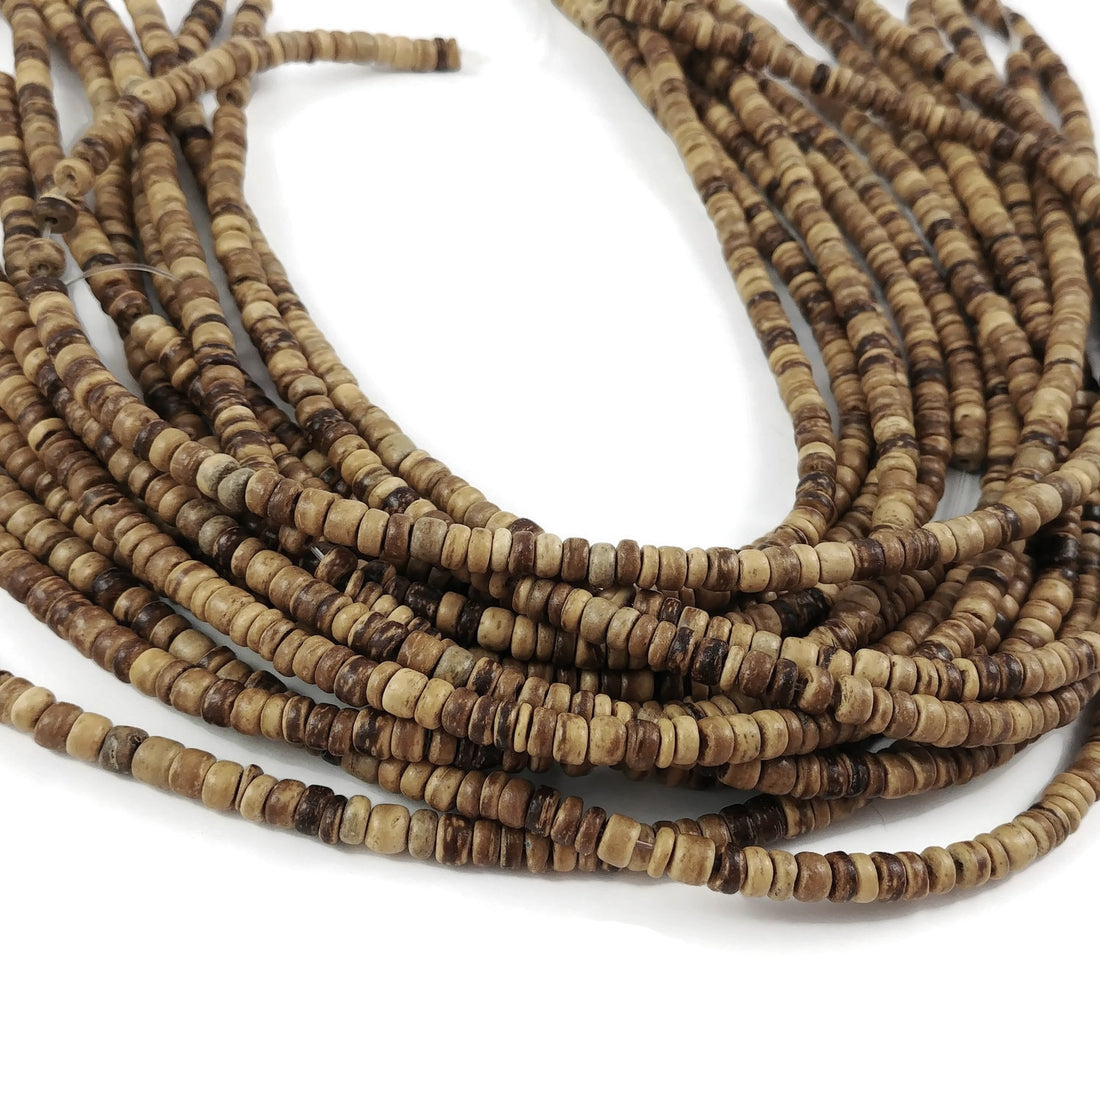 125 natural coconut beads - Coconut Rondelle Disk Beads 5mm 